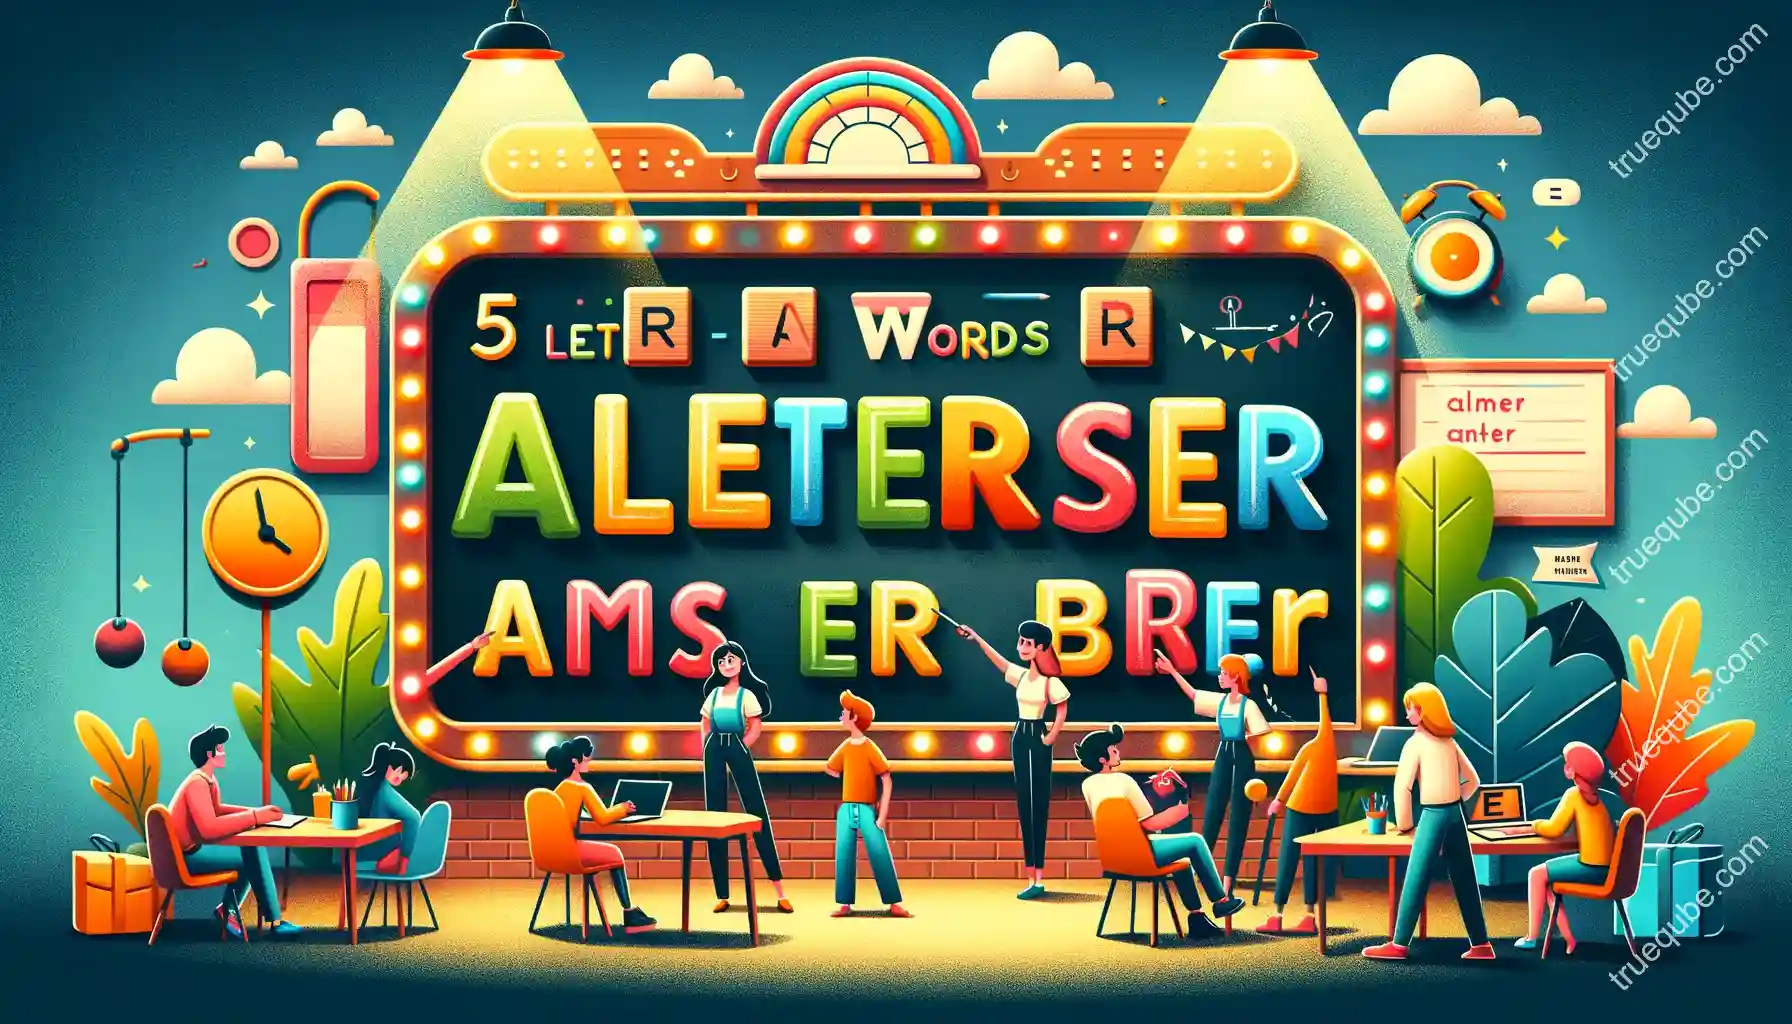 5 Letter Words Starting with A and ending with ER